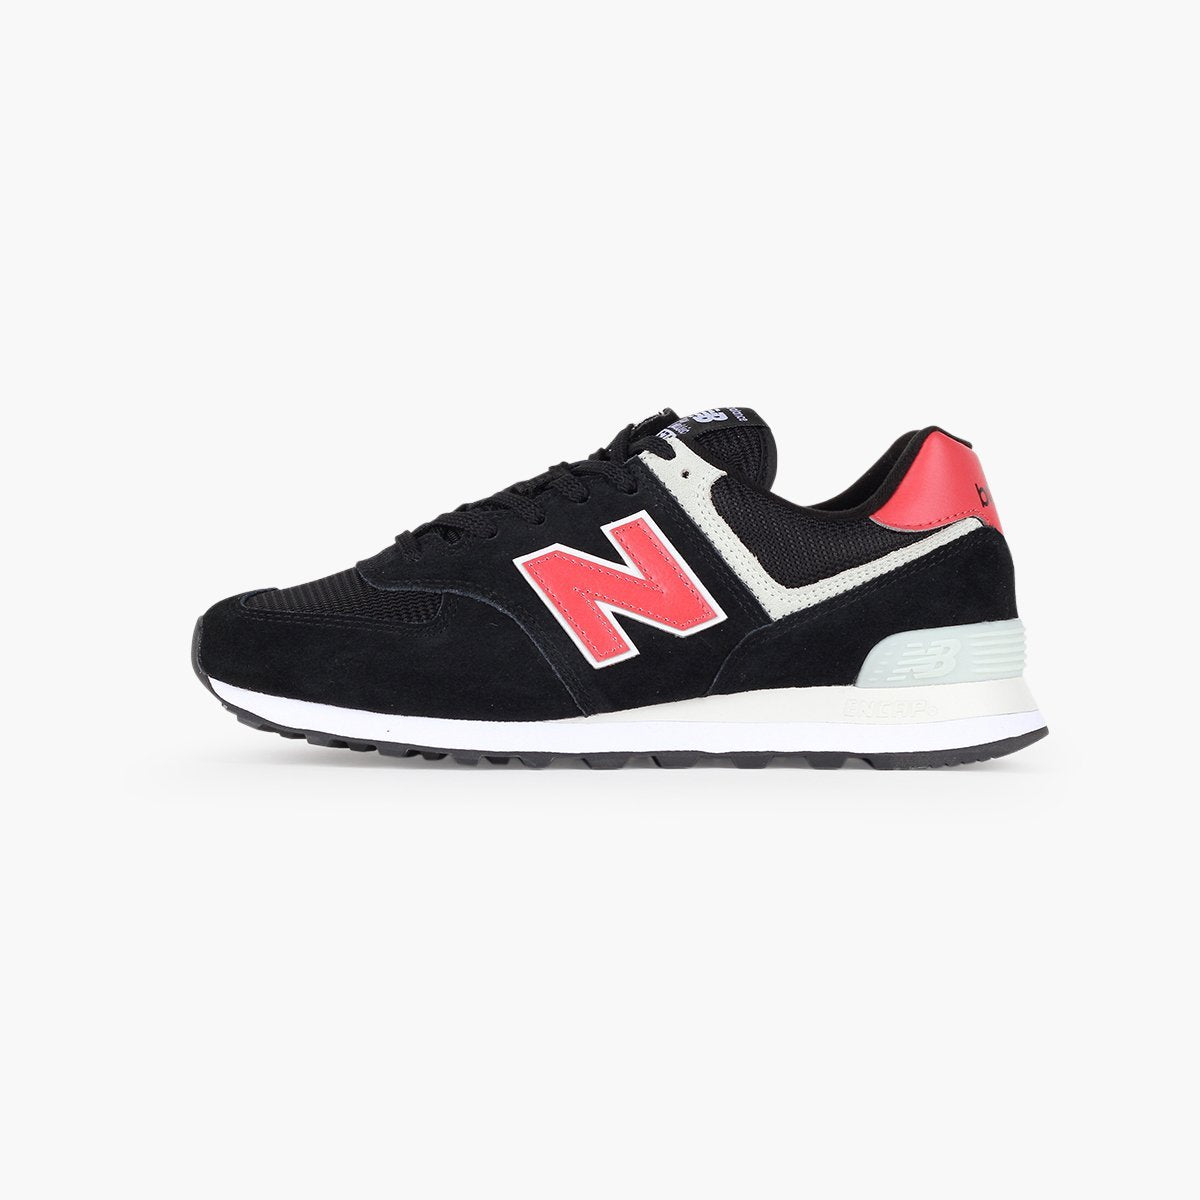 New Balance 574-SUEDE Store